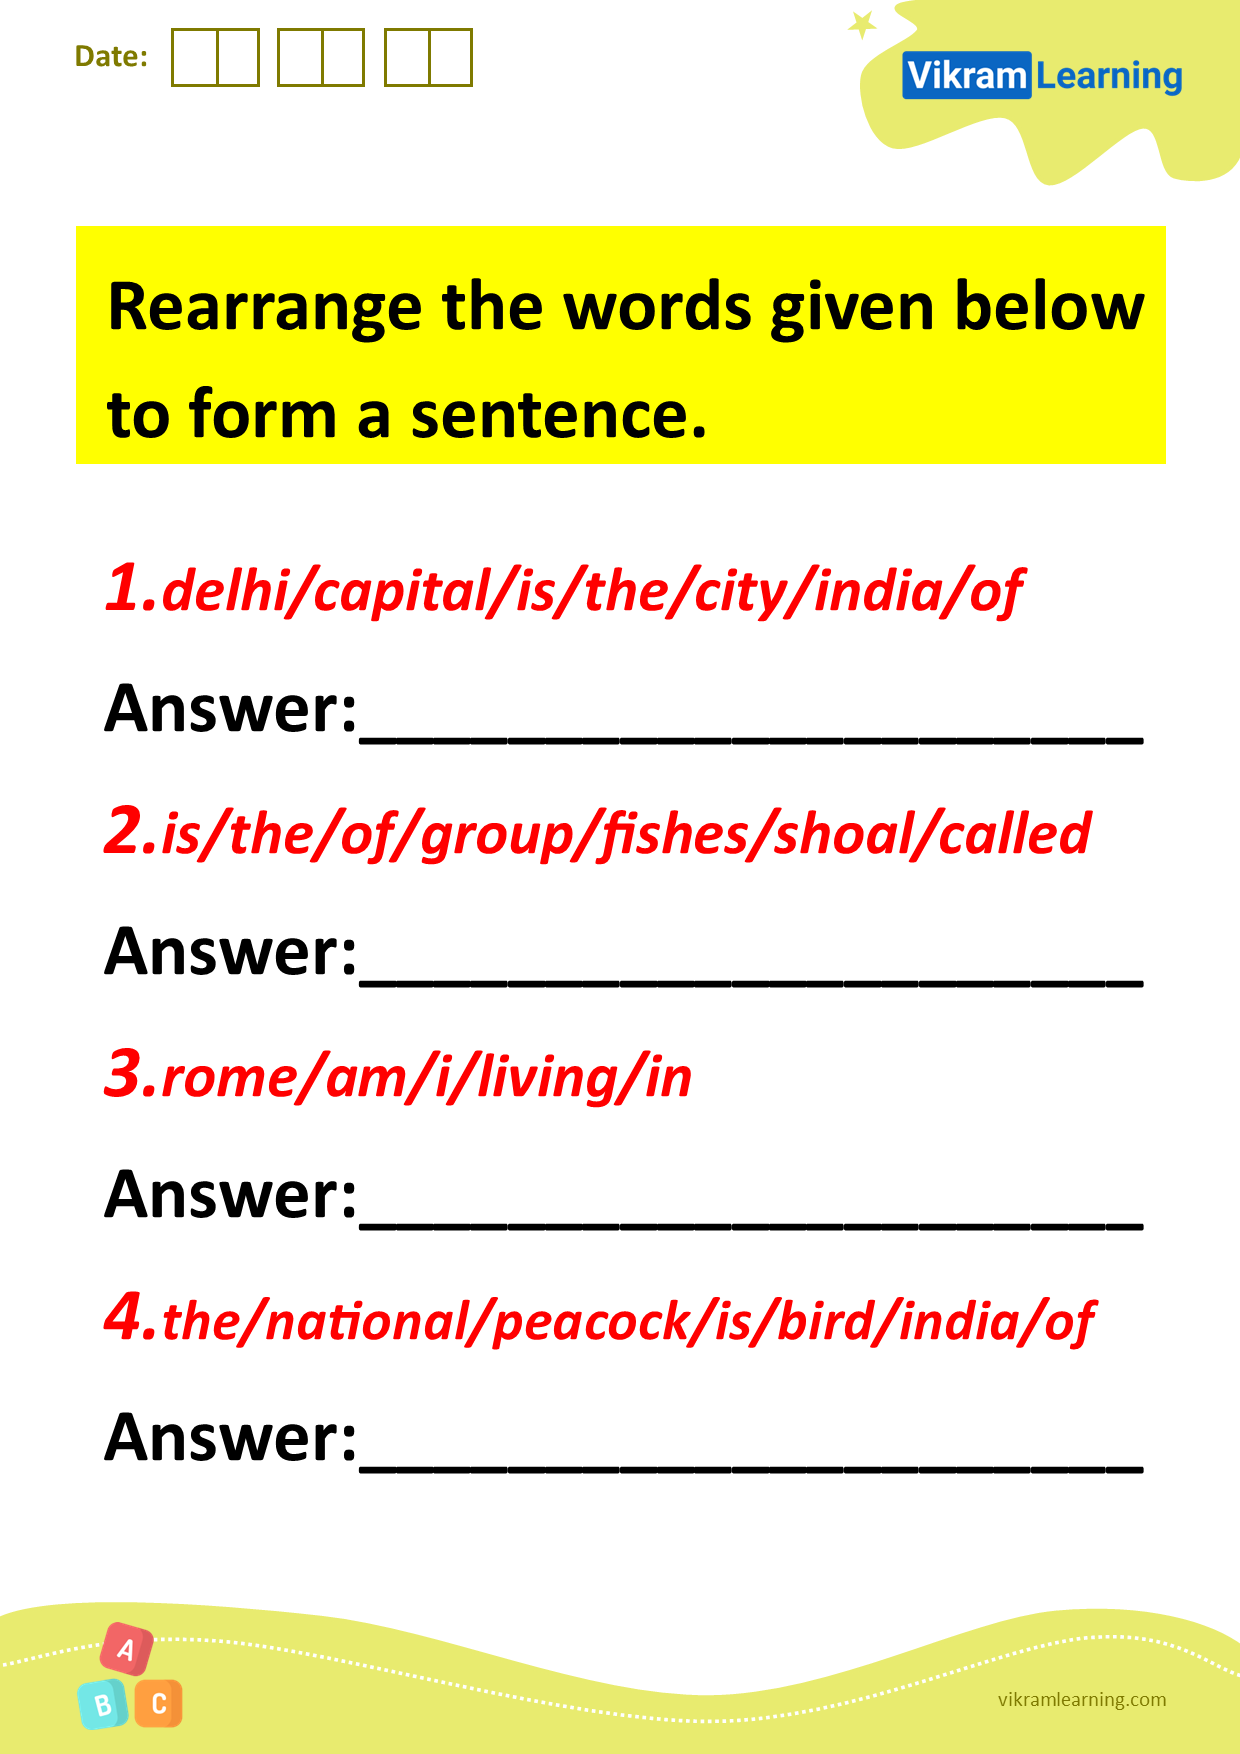 download-rearrange-the-words-given-below-to-form-a-sentence-worksheets